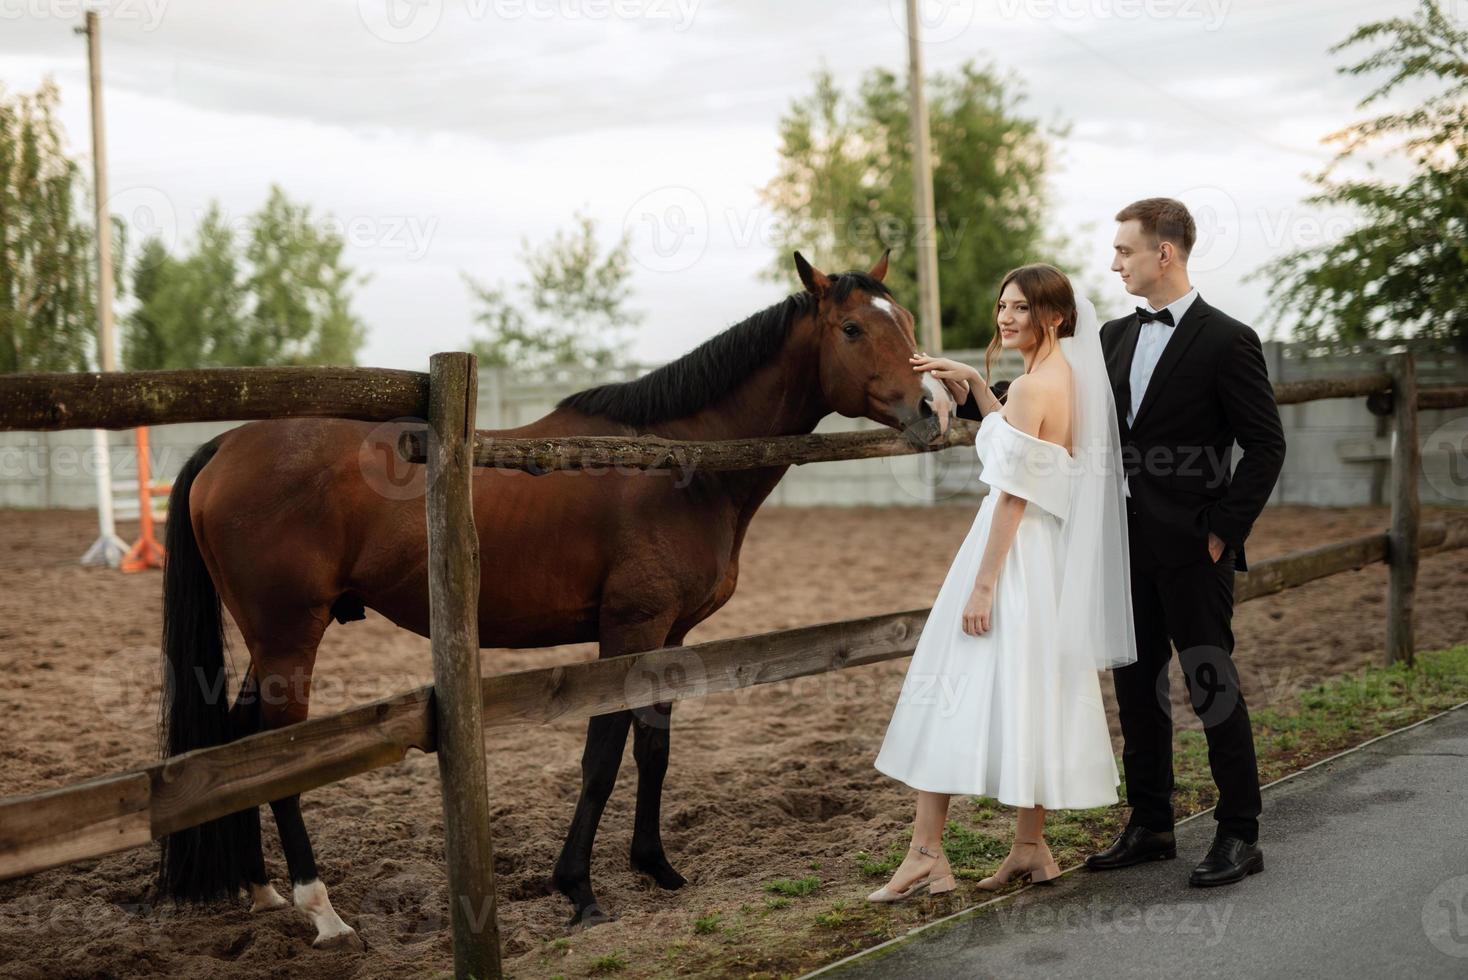 young couple the groom in a black suit and the bride in a white short dress photo